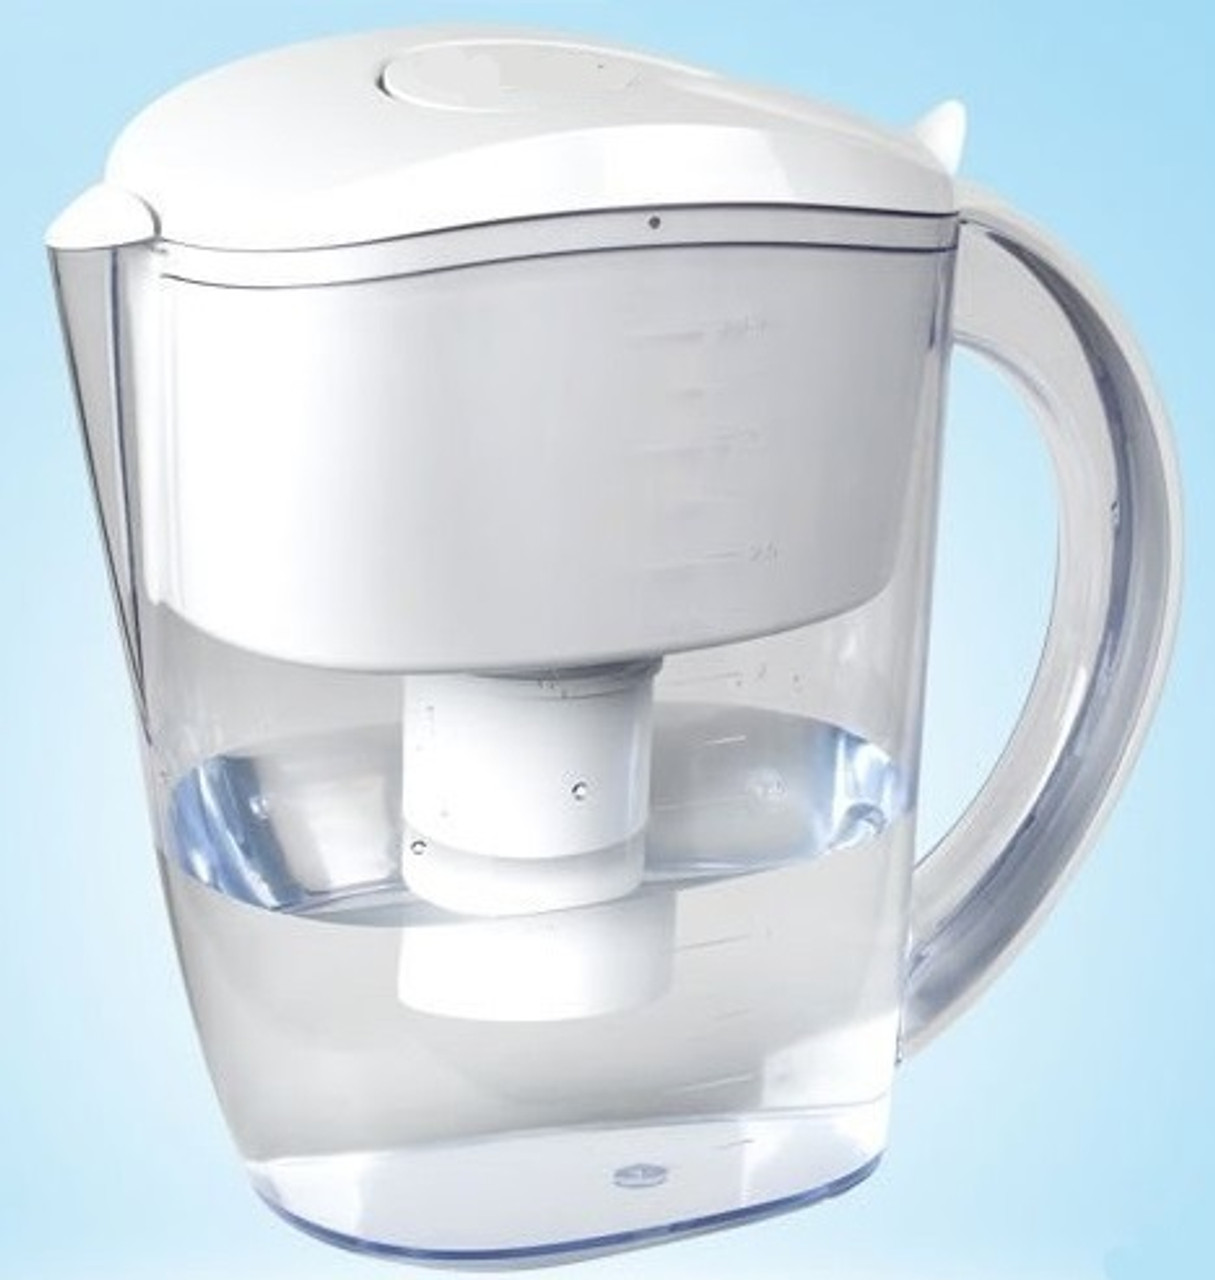 Alkanatur Alkaline Water Pitcher Filters Fluorides, Chlorine, Sodium, etc -  Alkalized and Ionized tap Water - High pH Alkalizer PH of 9.5, Most  Certified Pitcher FDA, CE, RoHS, SGS Approved and More 